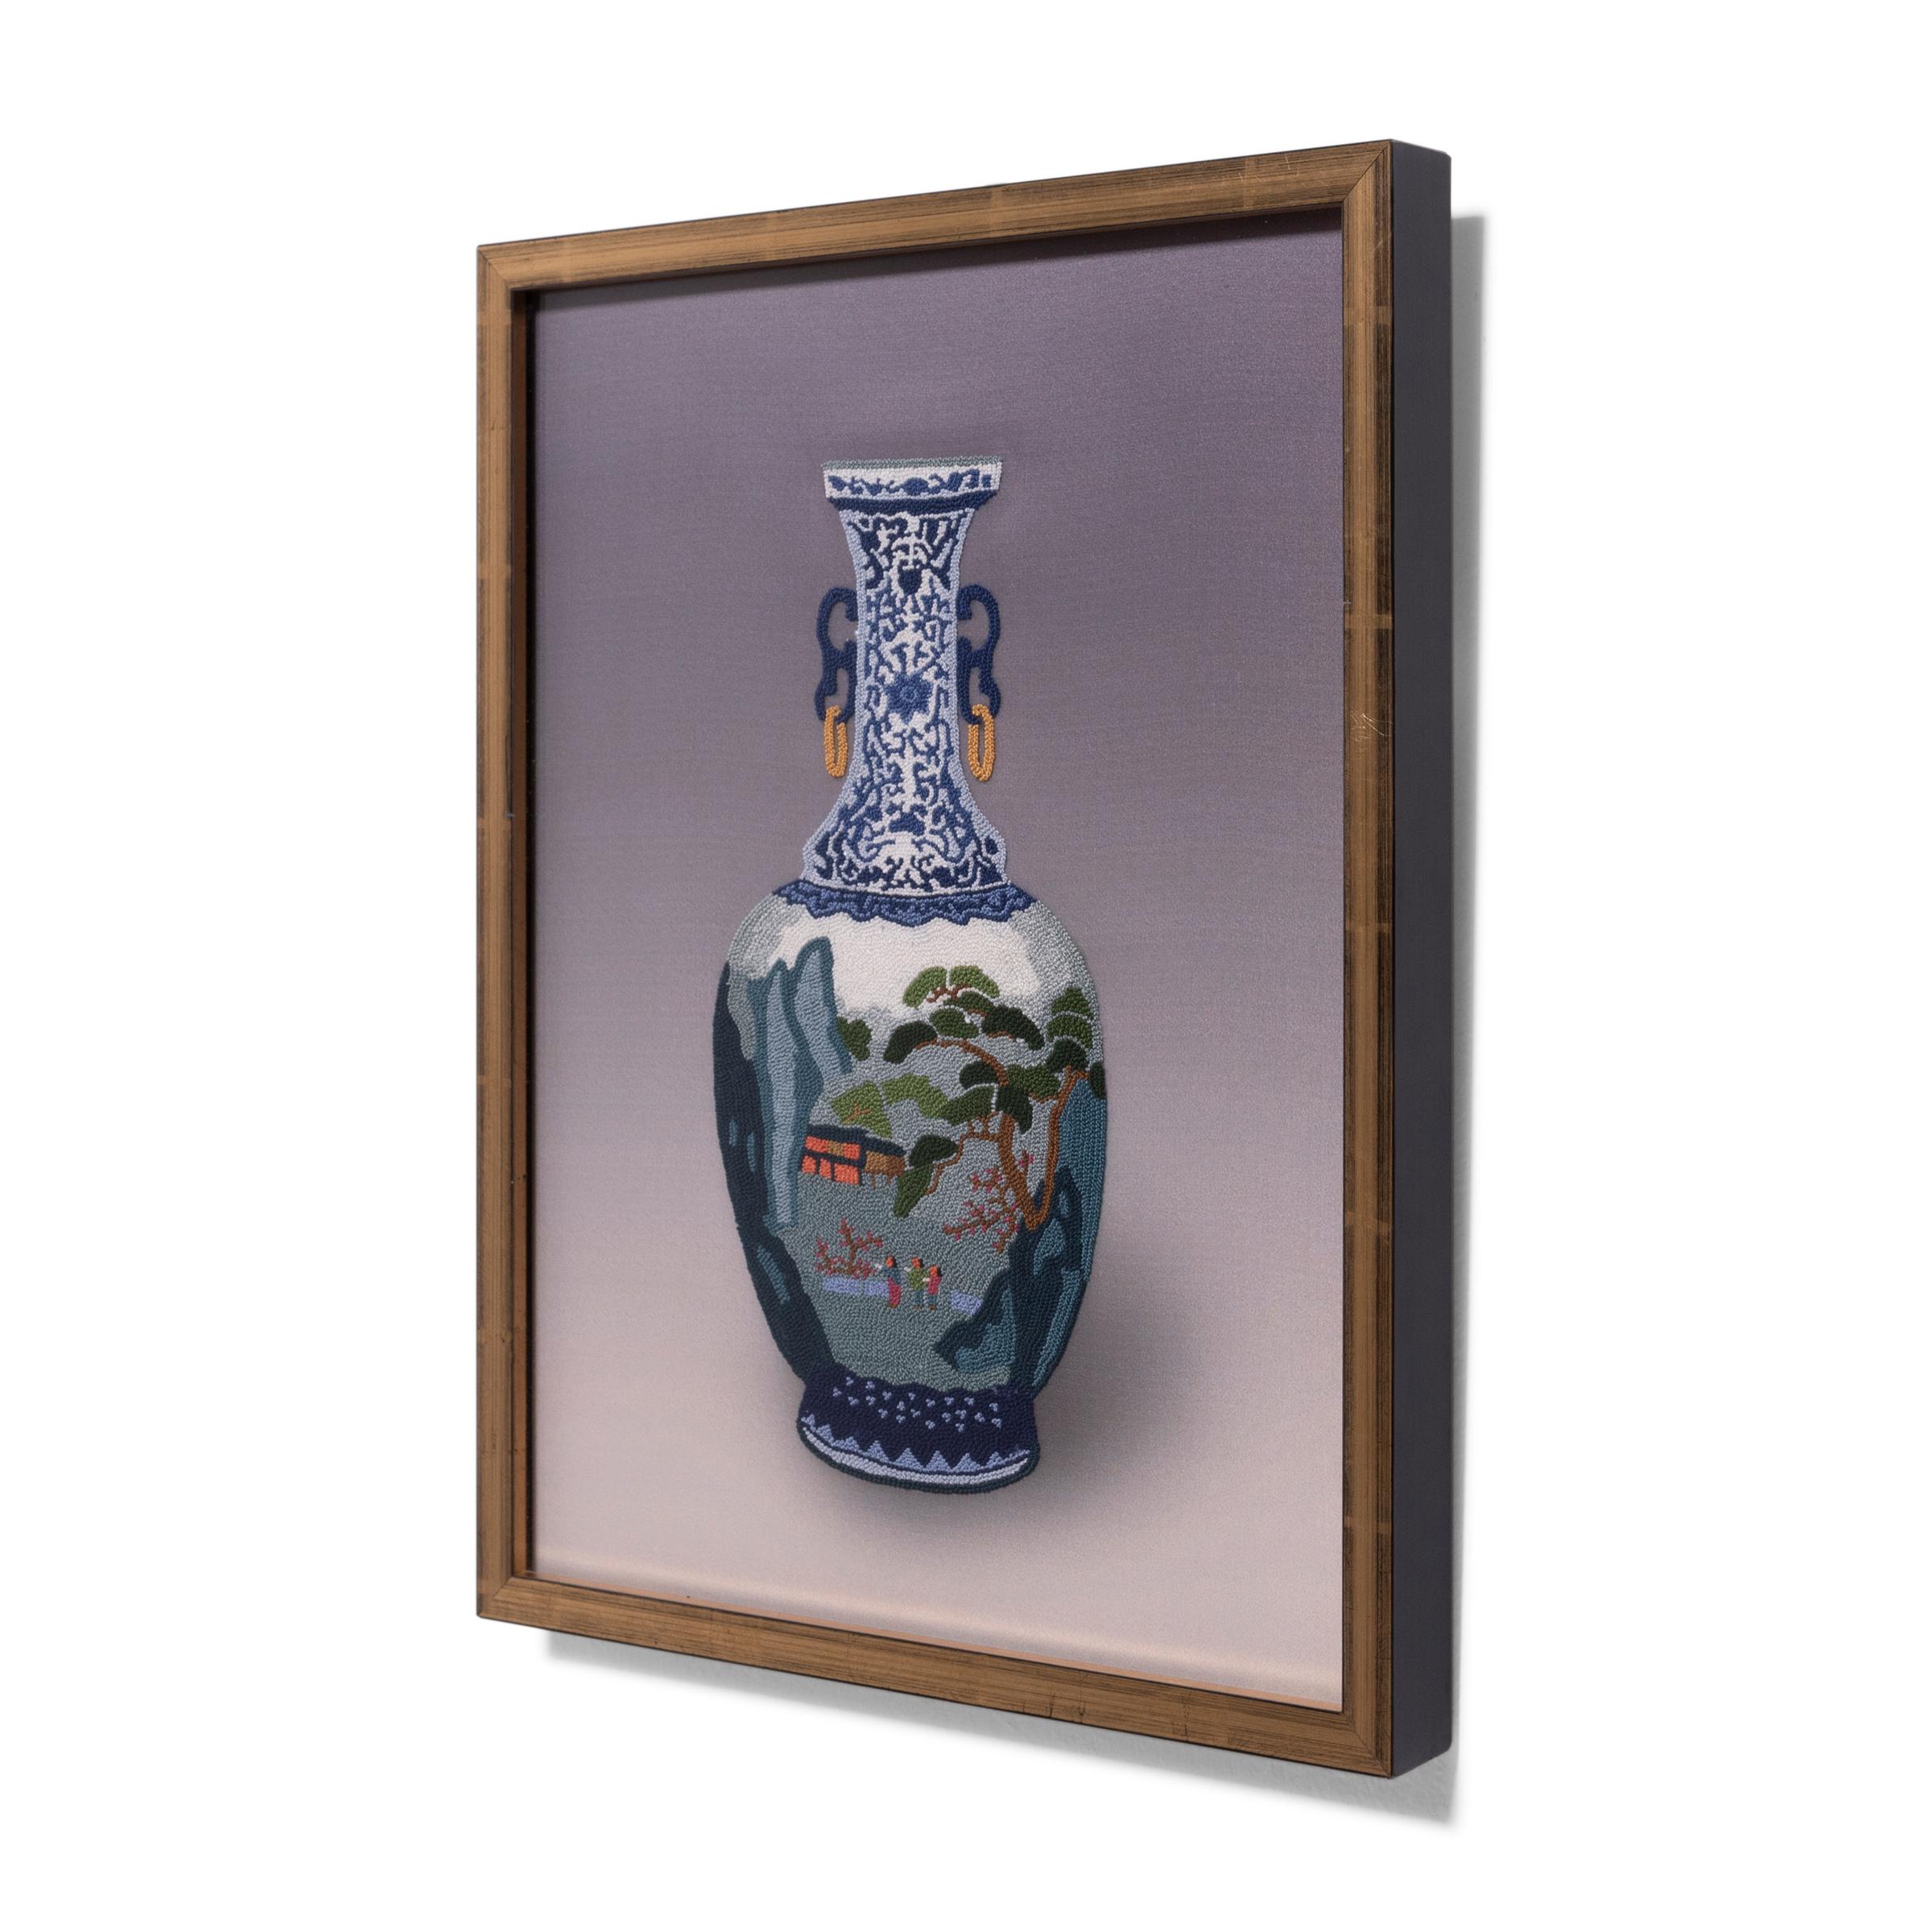 A wonderful example of Chinese embroidery, this framed silk textile uses the infamous forbidden stitch to depict a fine blue-and-white porcelain vase. Also known as the 